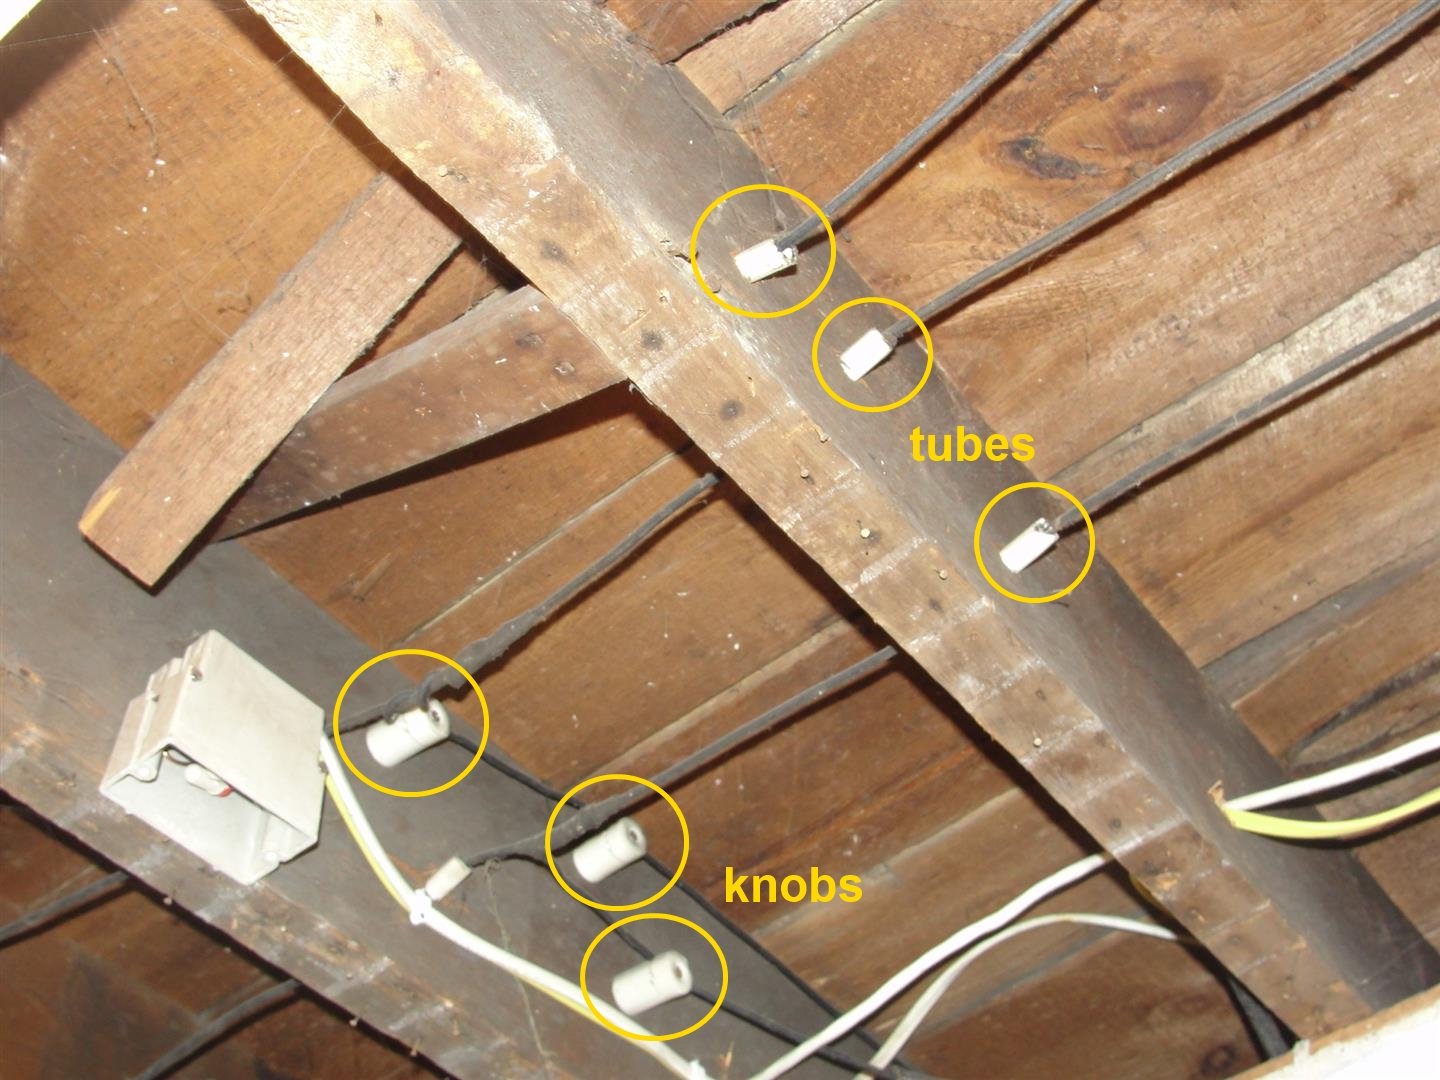 knob and tub wiring in old homes and trying to insure them.  The Miller Insurance Agency Everett Washington